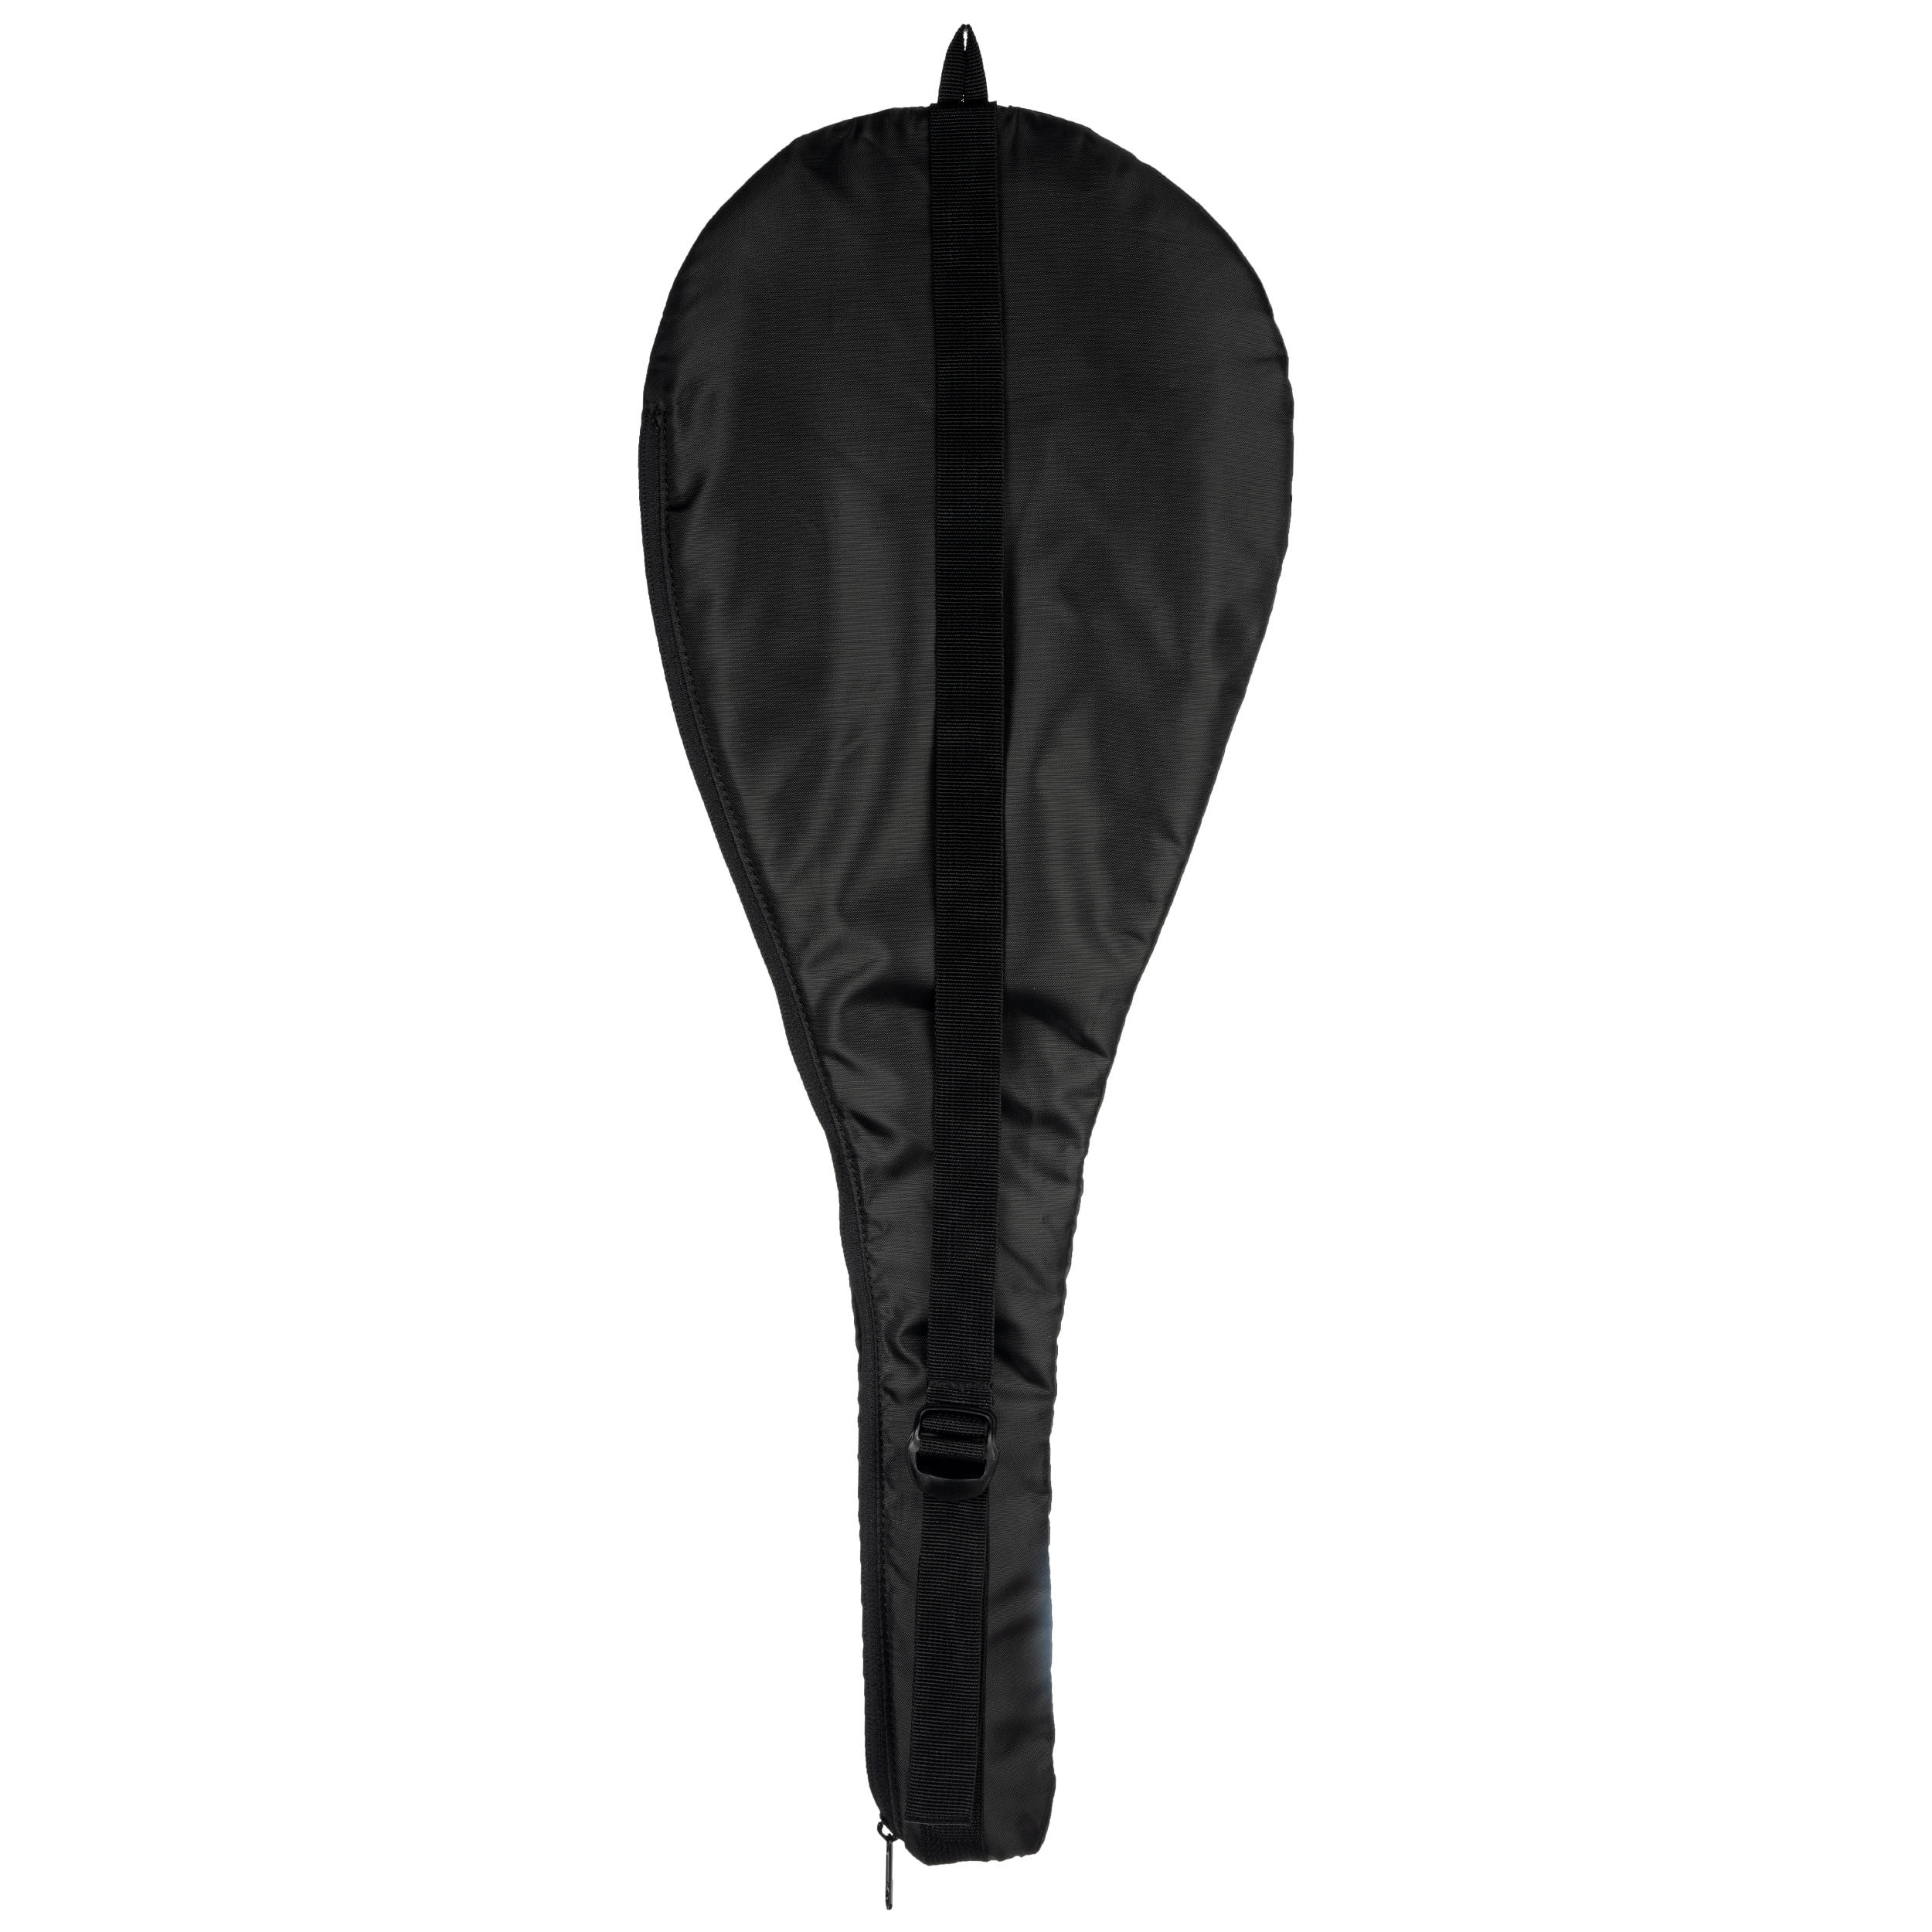 SL 100 Protective Squash Racket Cover - No Size By OPFEEL | Decathlon